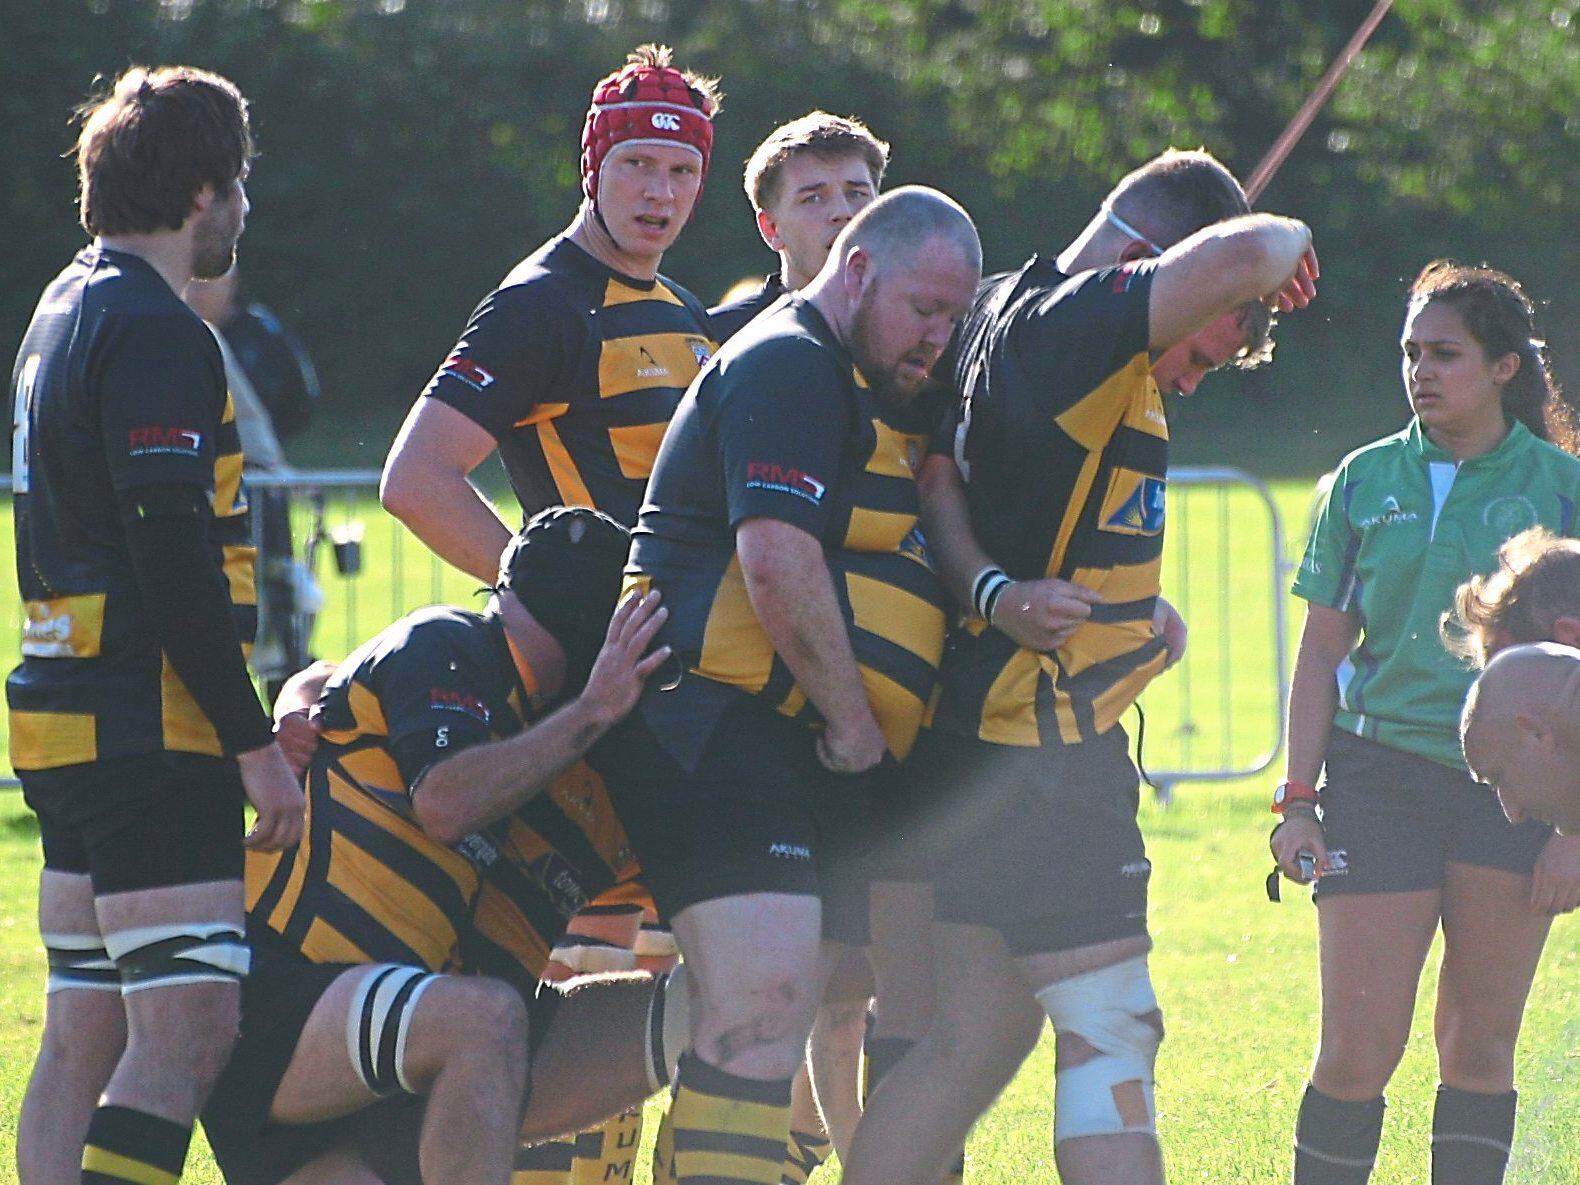 DK are taught a lesson in defeat to Exeter University 